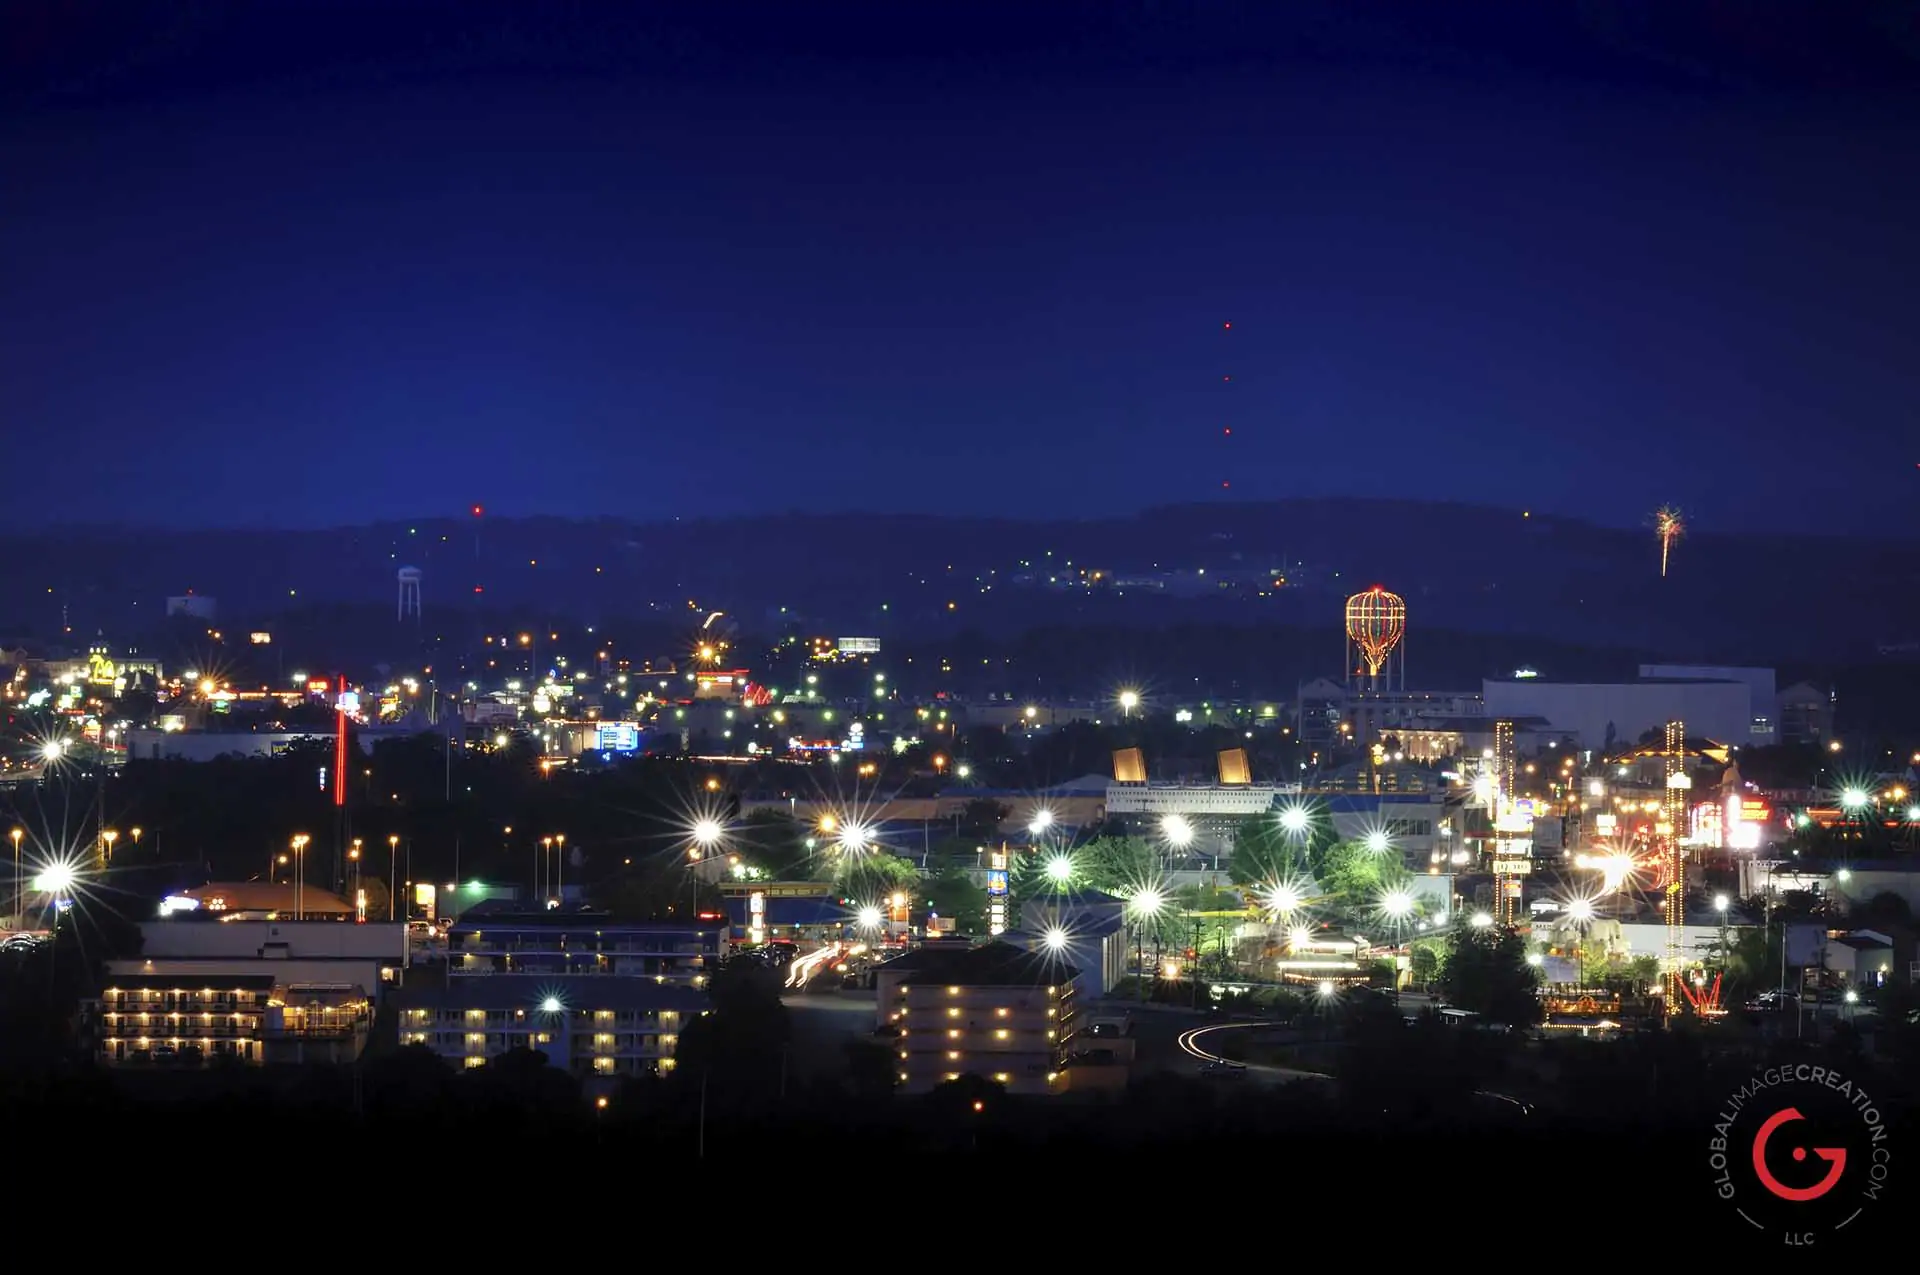 Branson Landscape in the night viewed from the Butterfly palace. - Advertising photographers in Branson Missouri, Branson Missouri photography